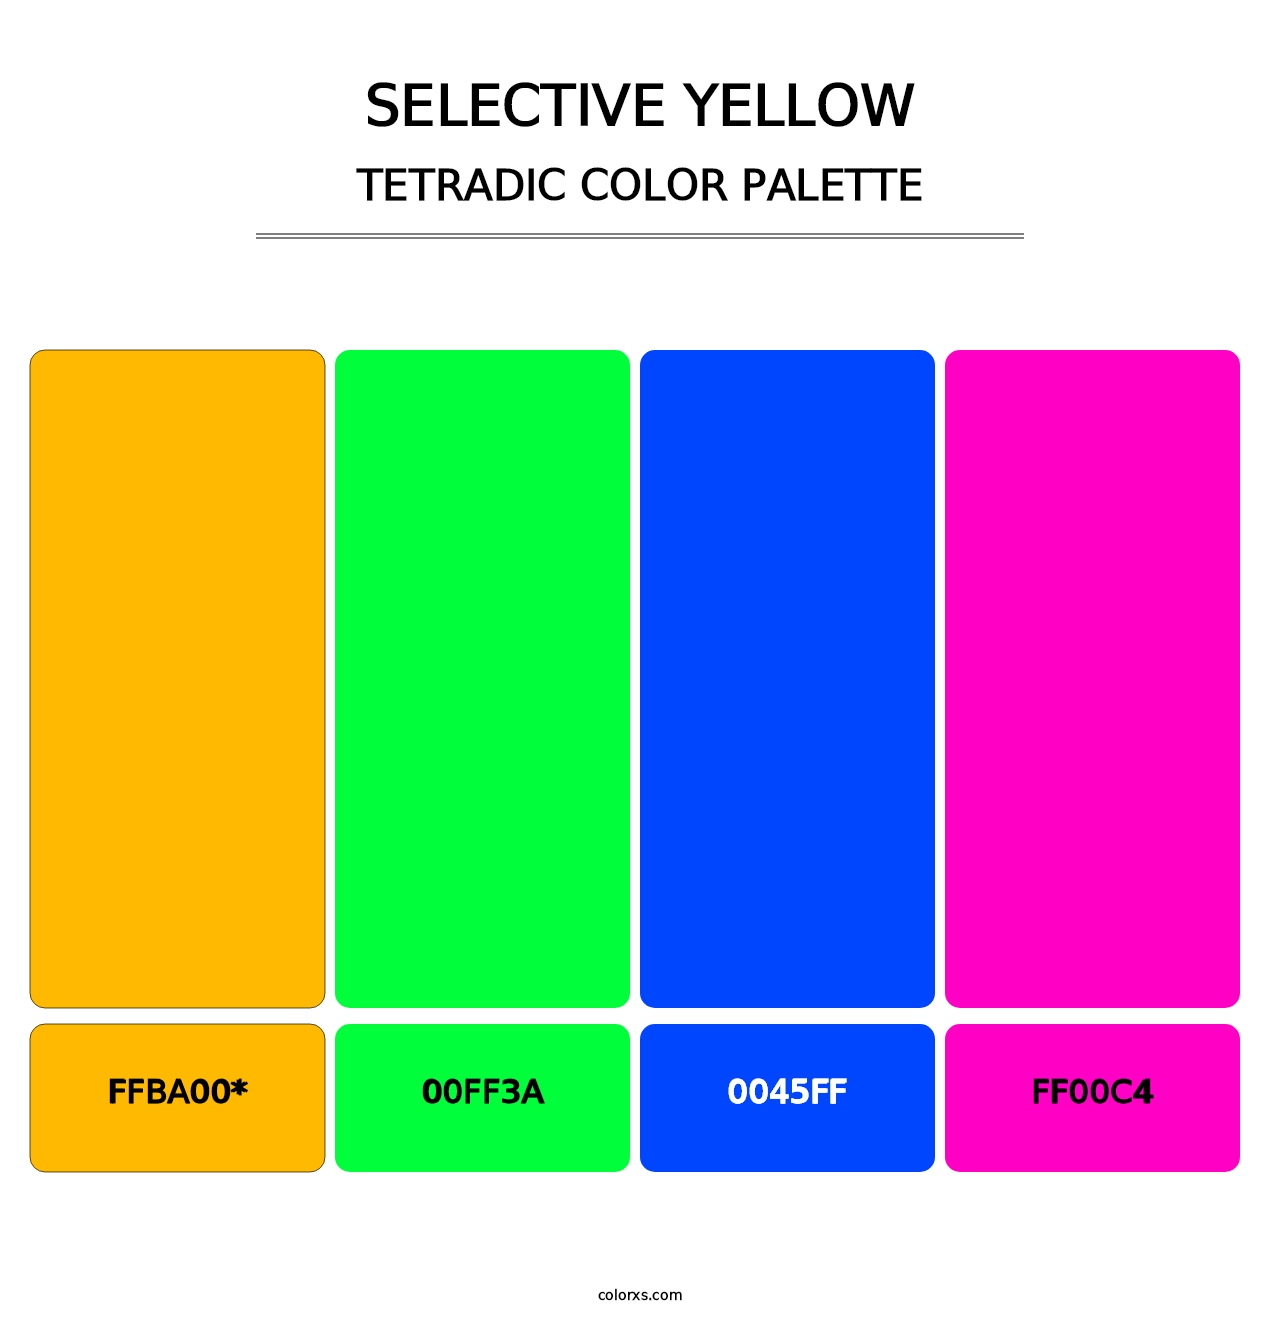 Selective yellow - Tetradic Color Palette